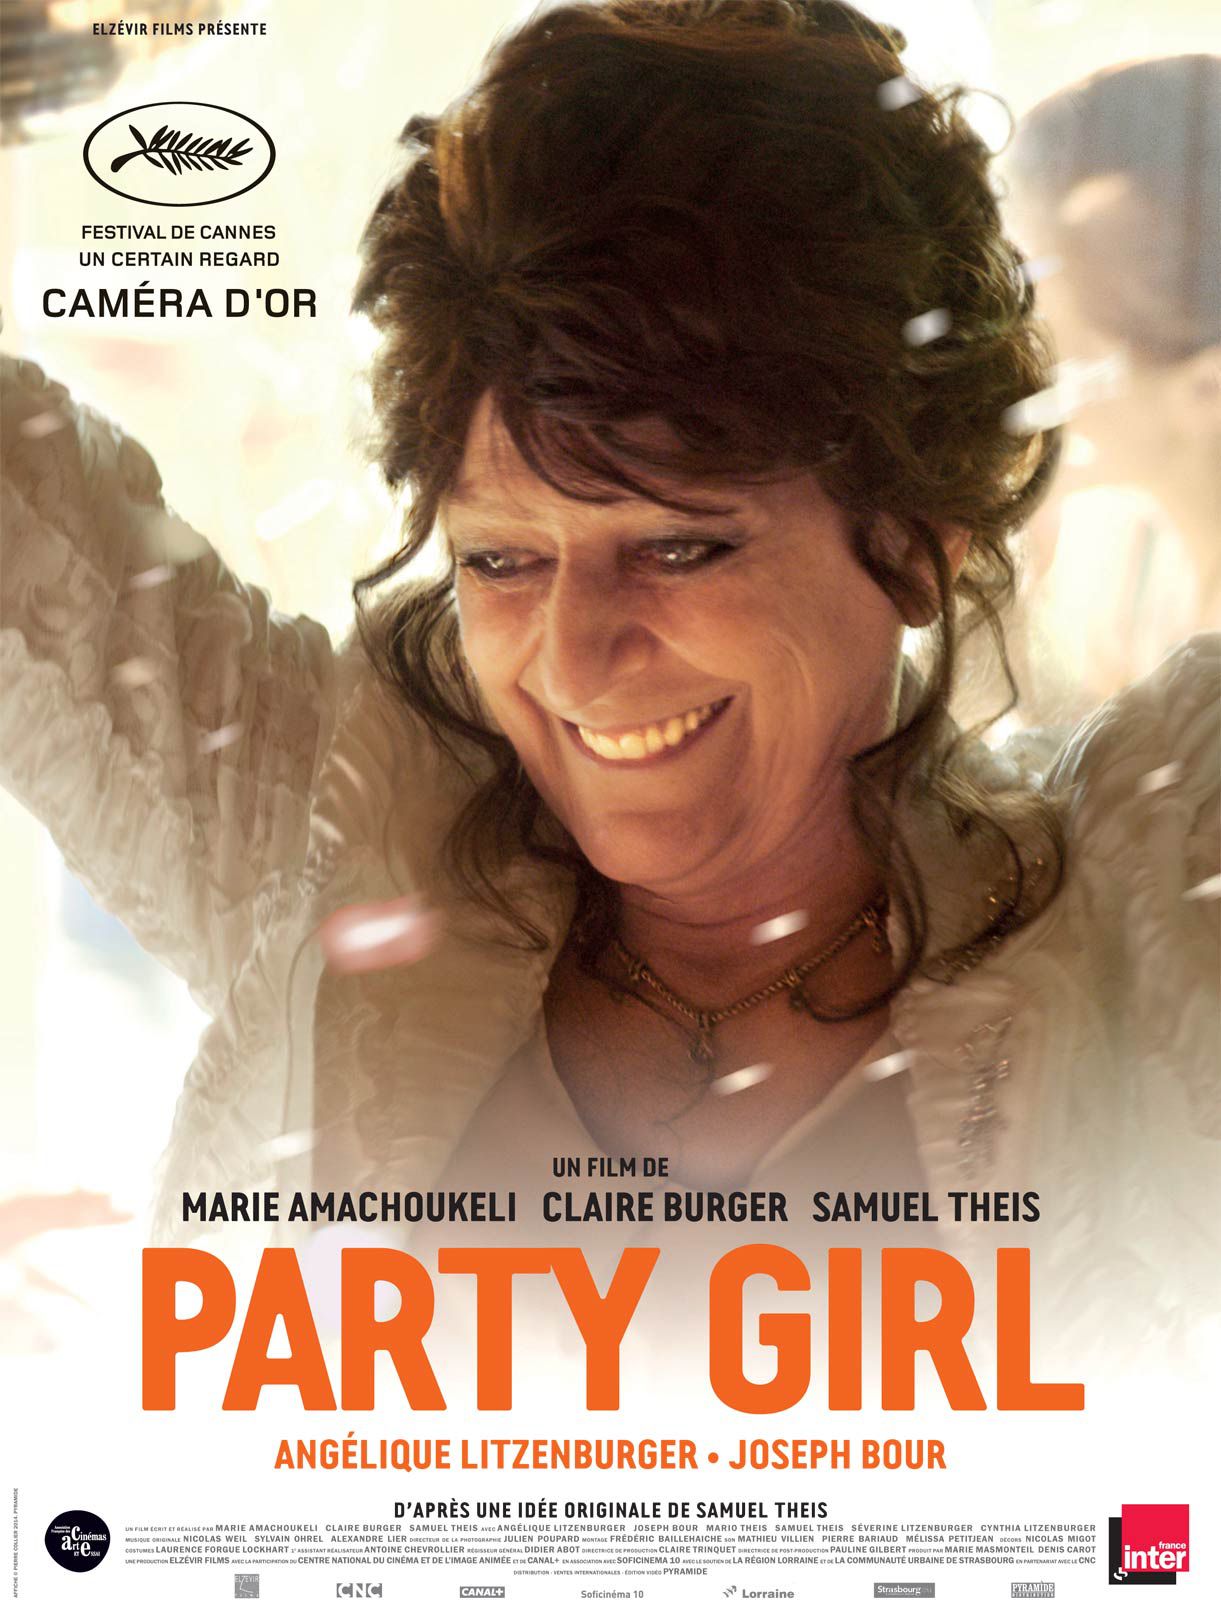 Party Girl - Film (2014) streaming VF gratuit complet